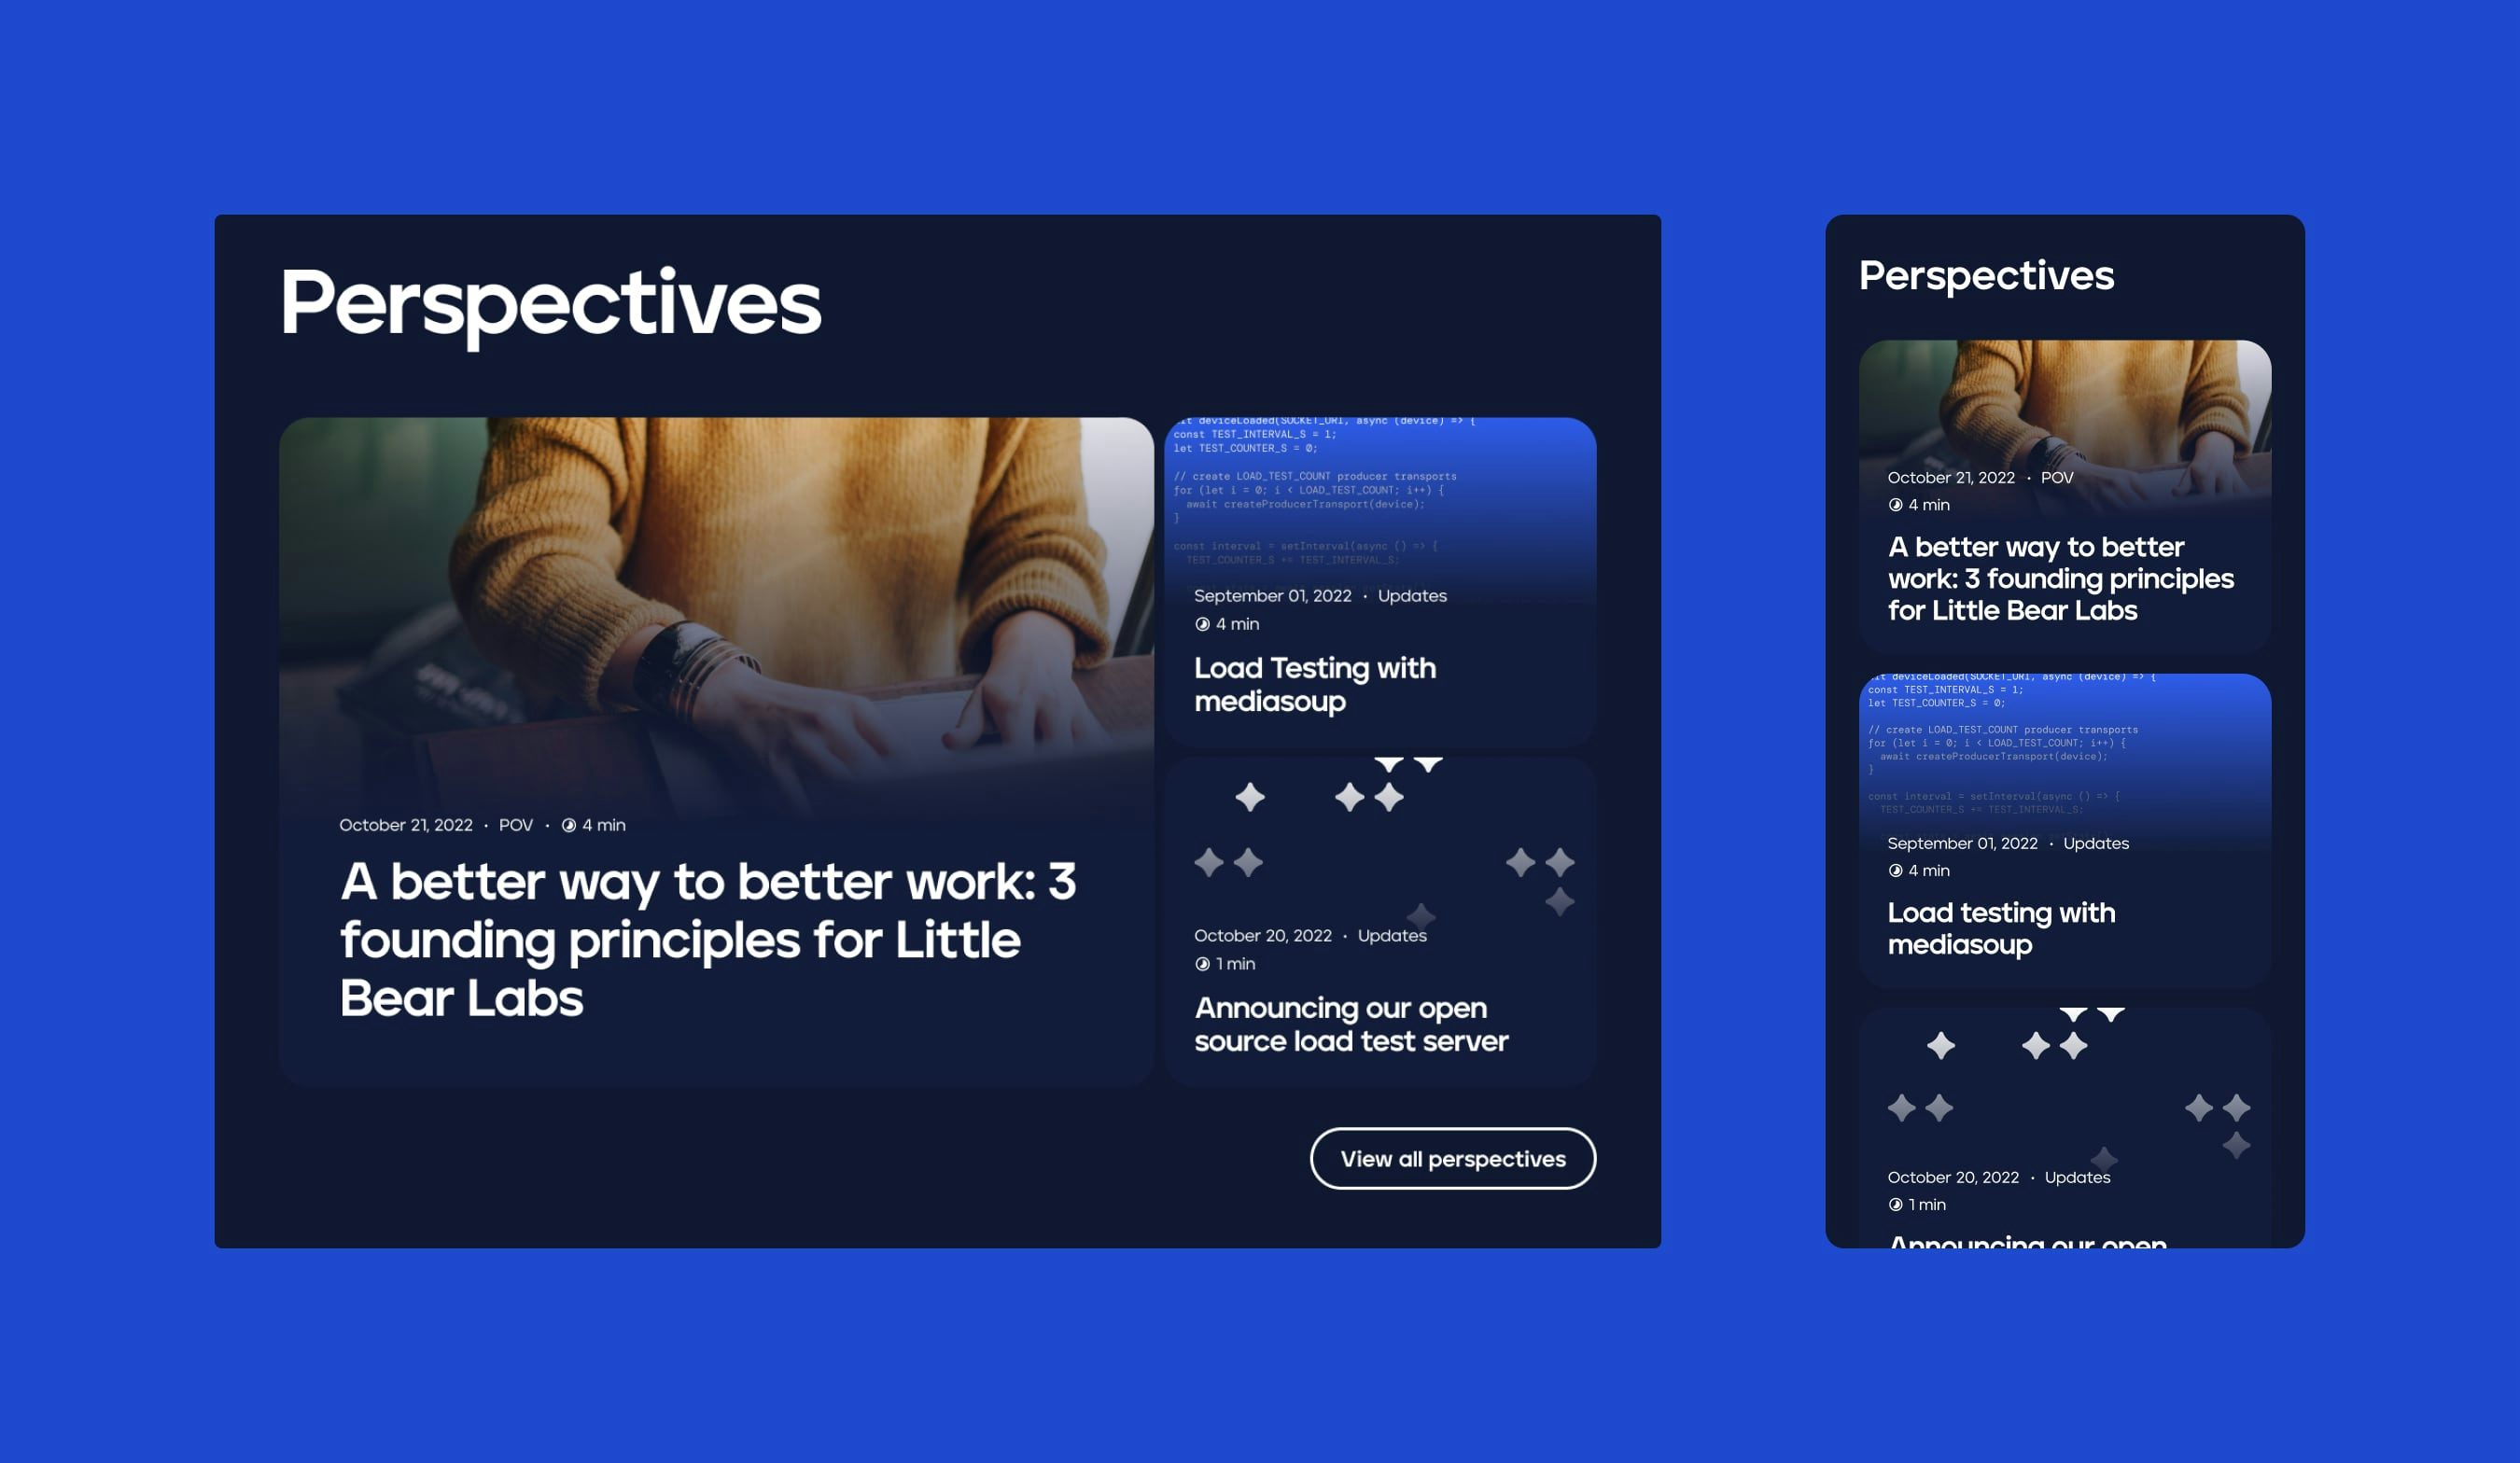 Mockup of Perspectives panel on Little Bear Labs in desktop and mobile views